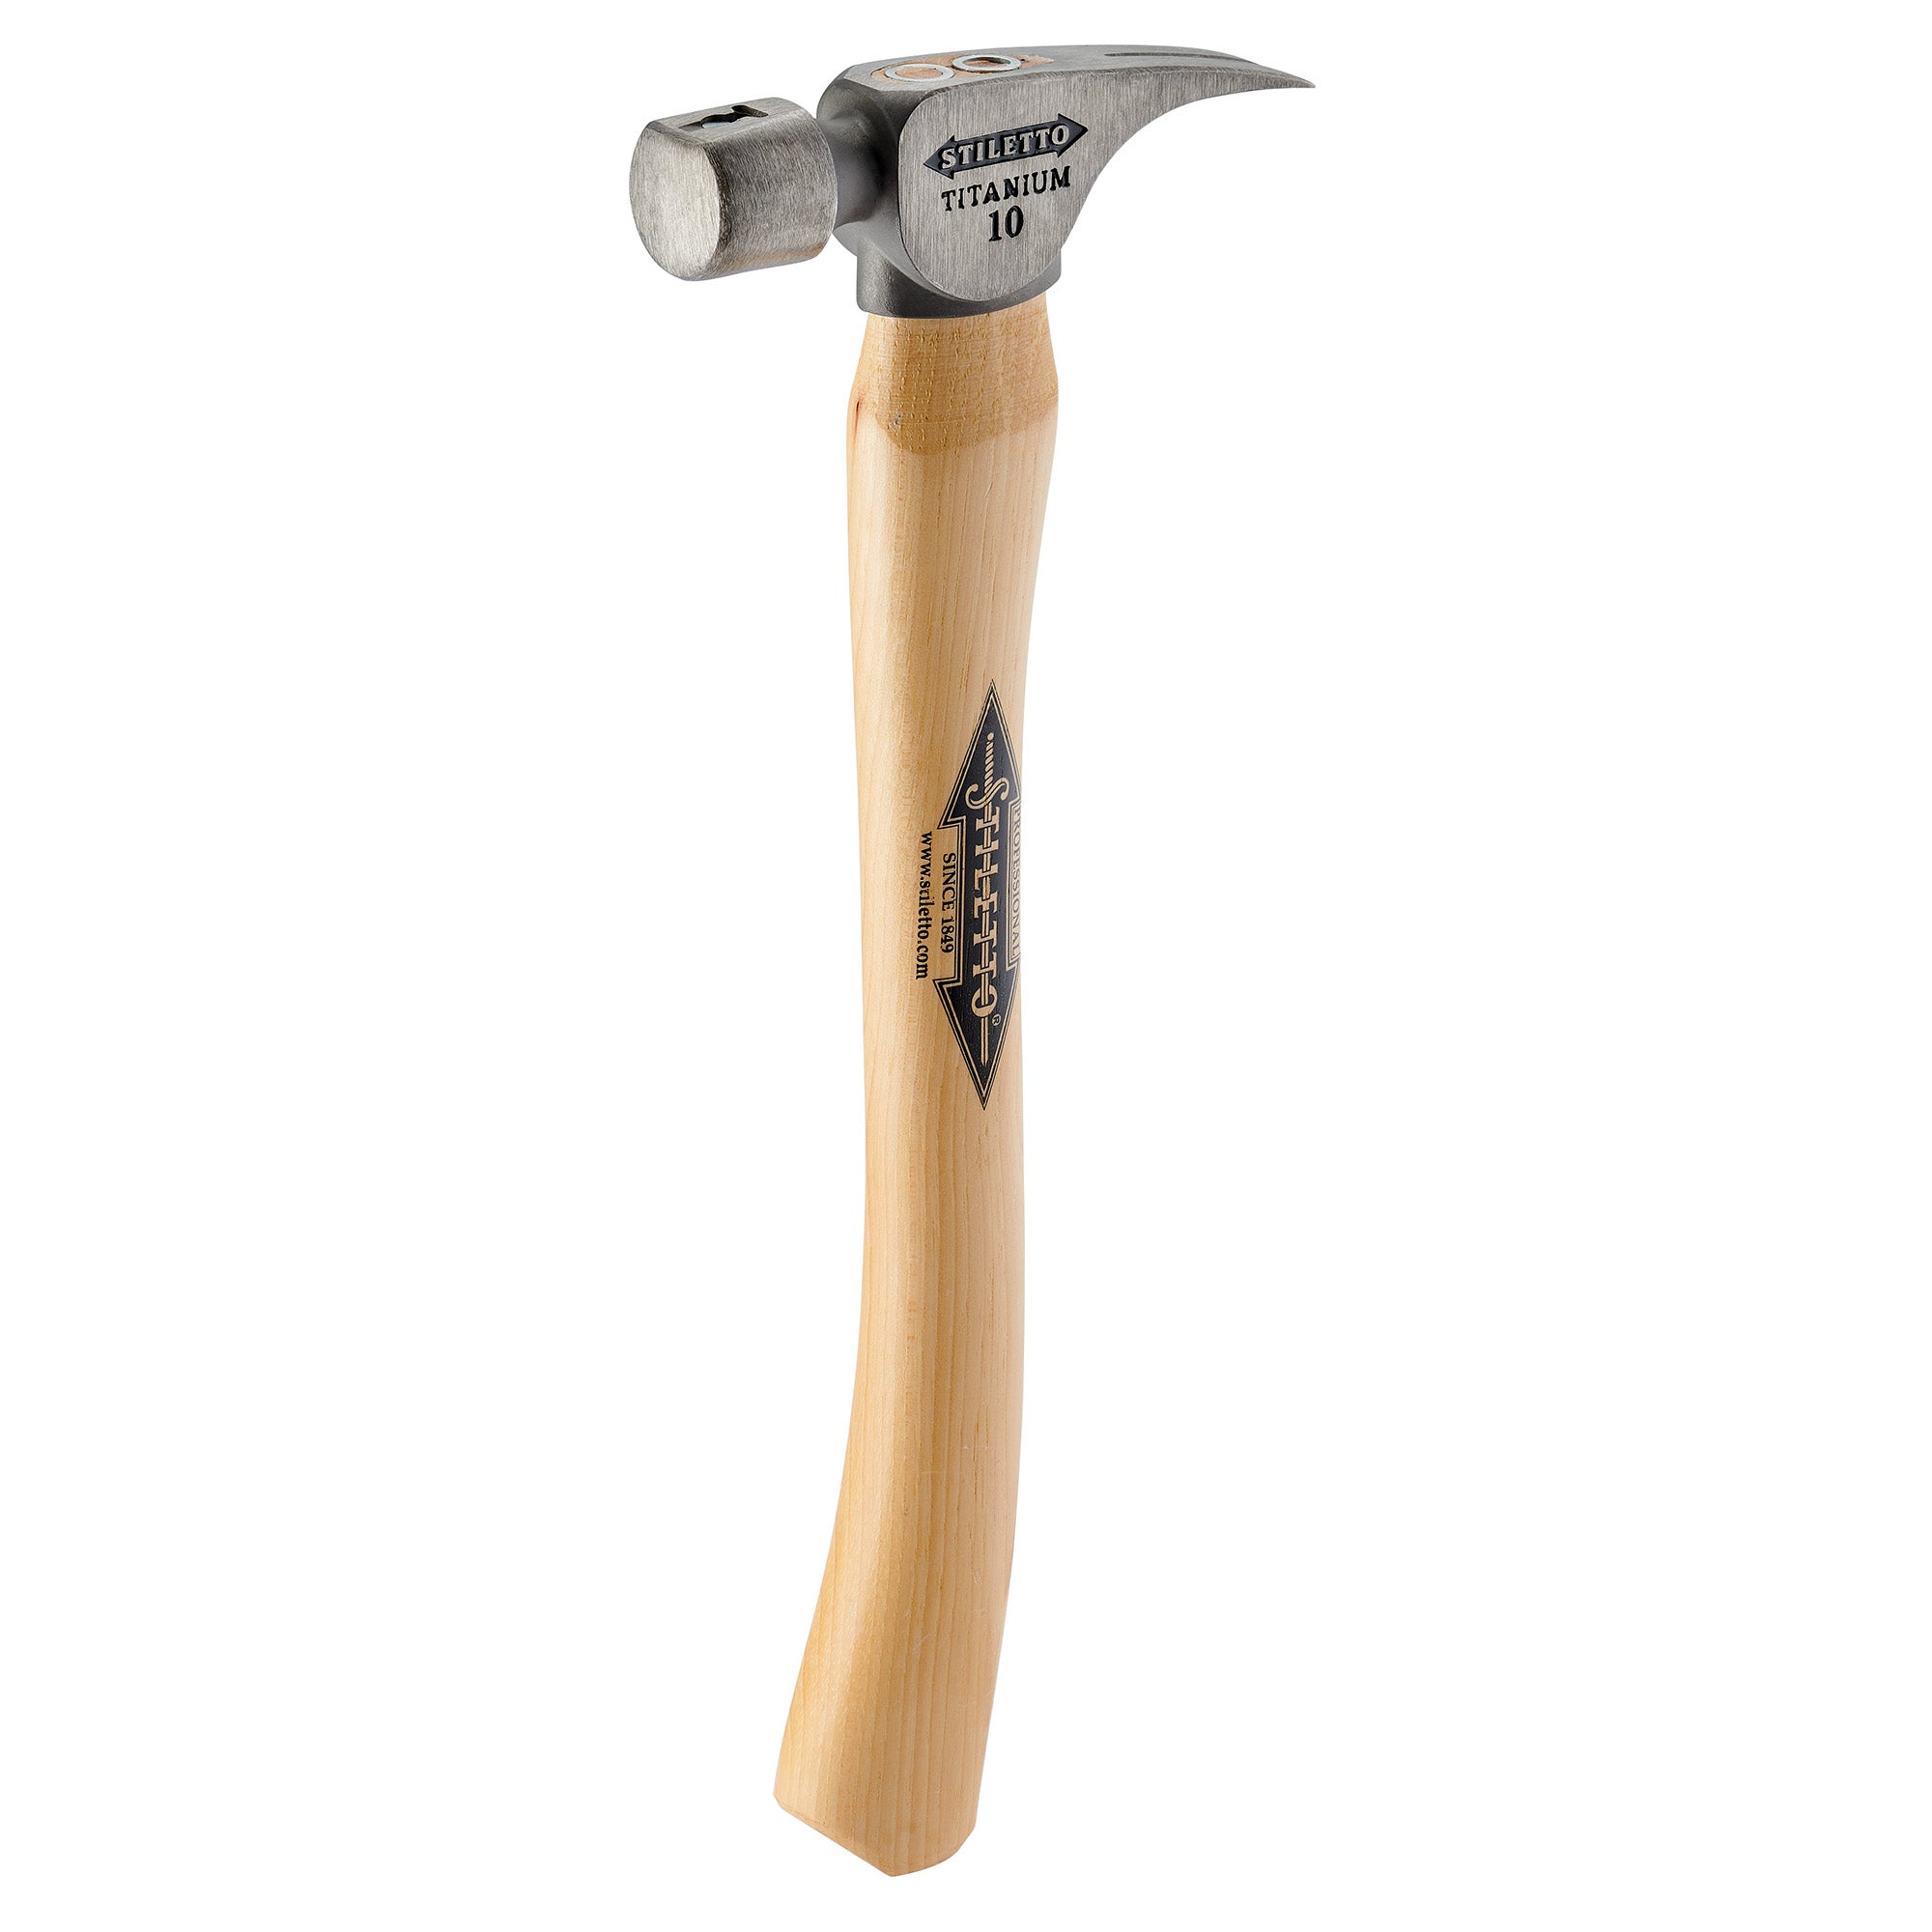 Qwork Welding Chipping Hammer, 14oz, Two-head Hammer with Wooden